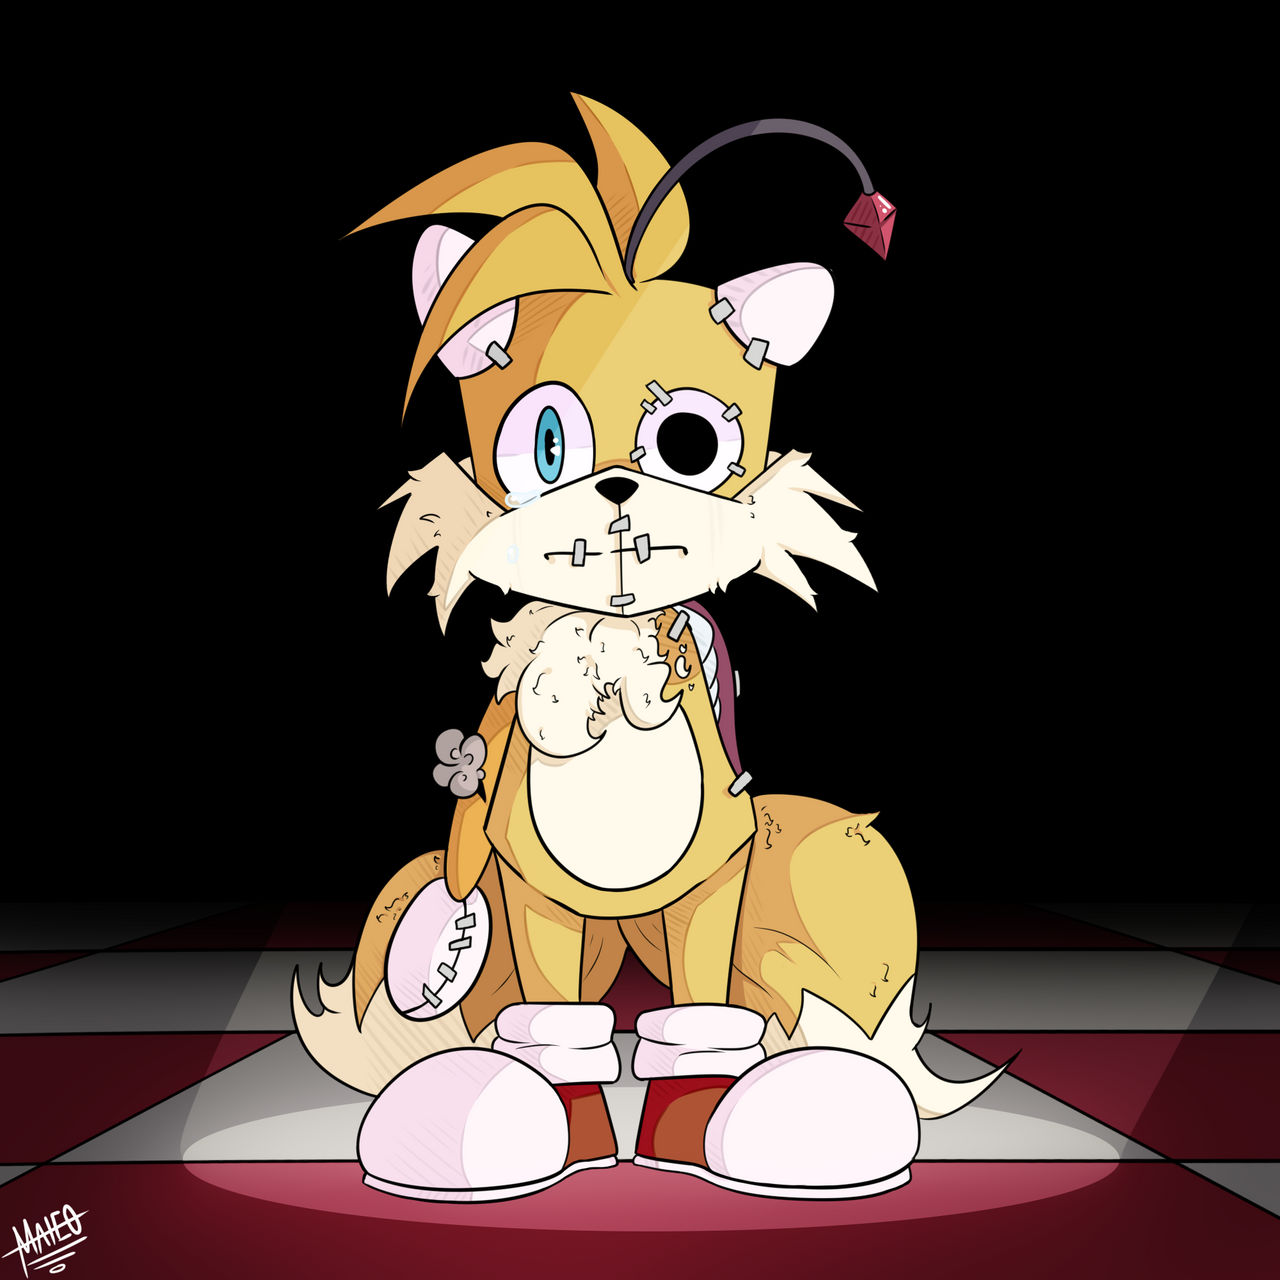 Tails Doll fanart by Cakeb00 on DeviantArt